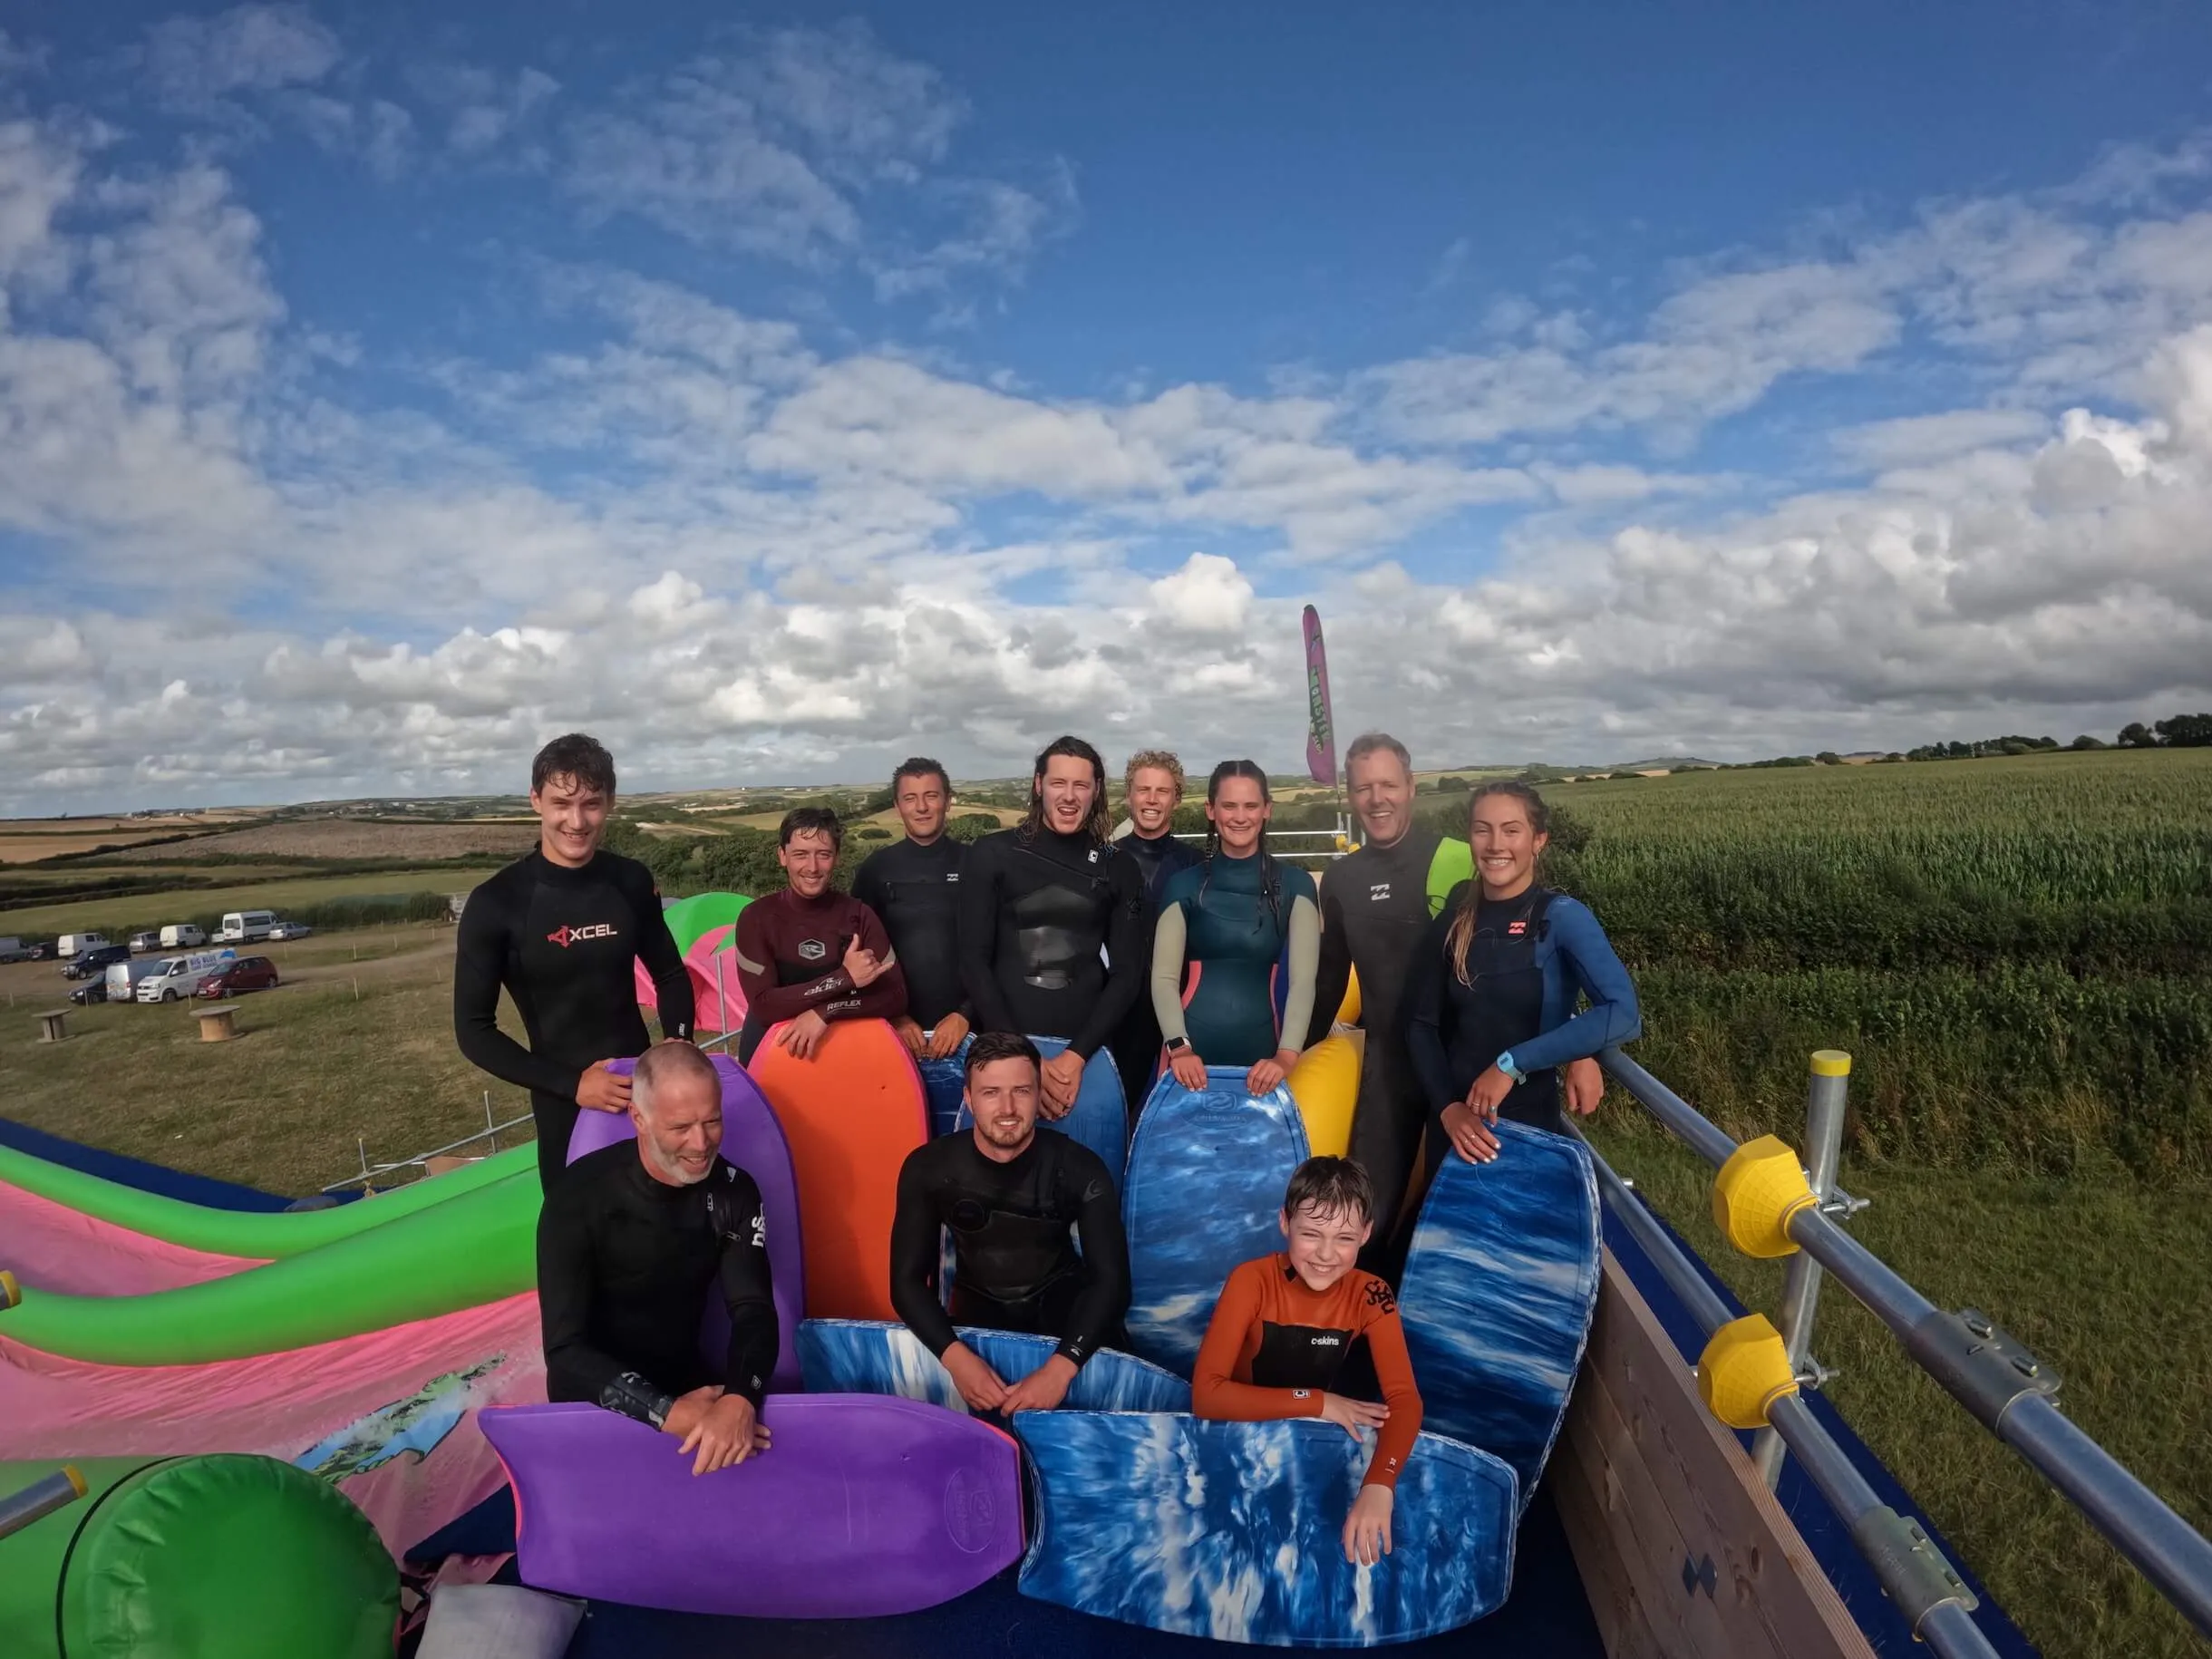 oa surf club team at the slip and slide